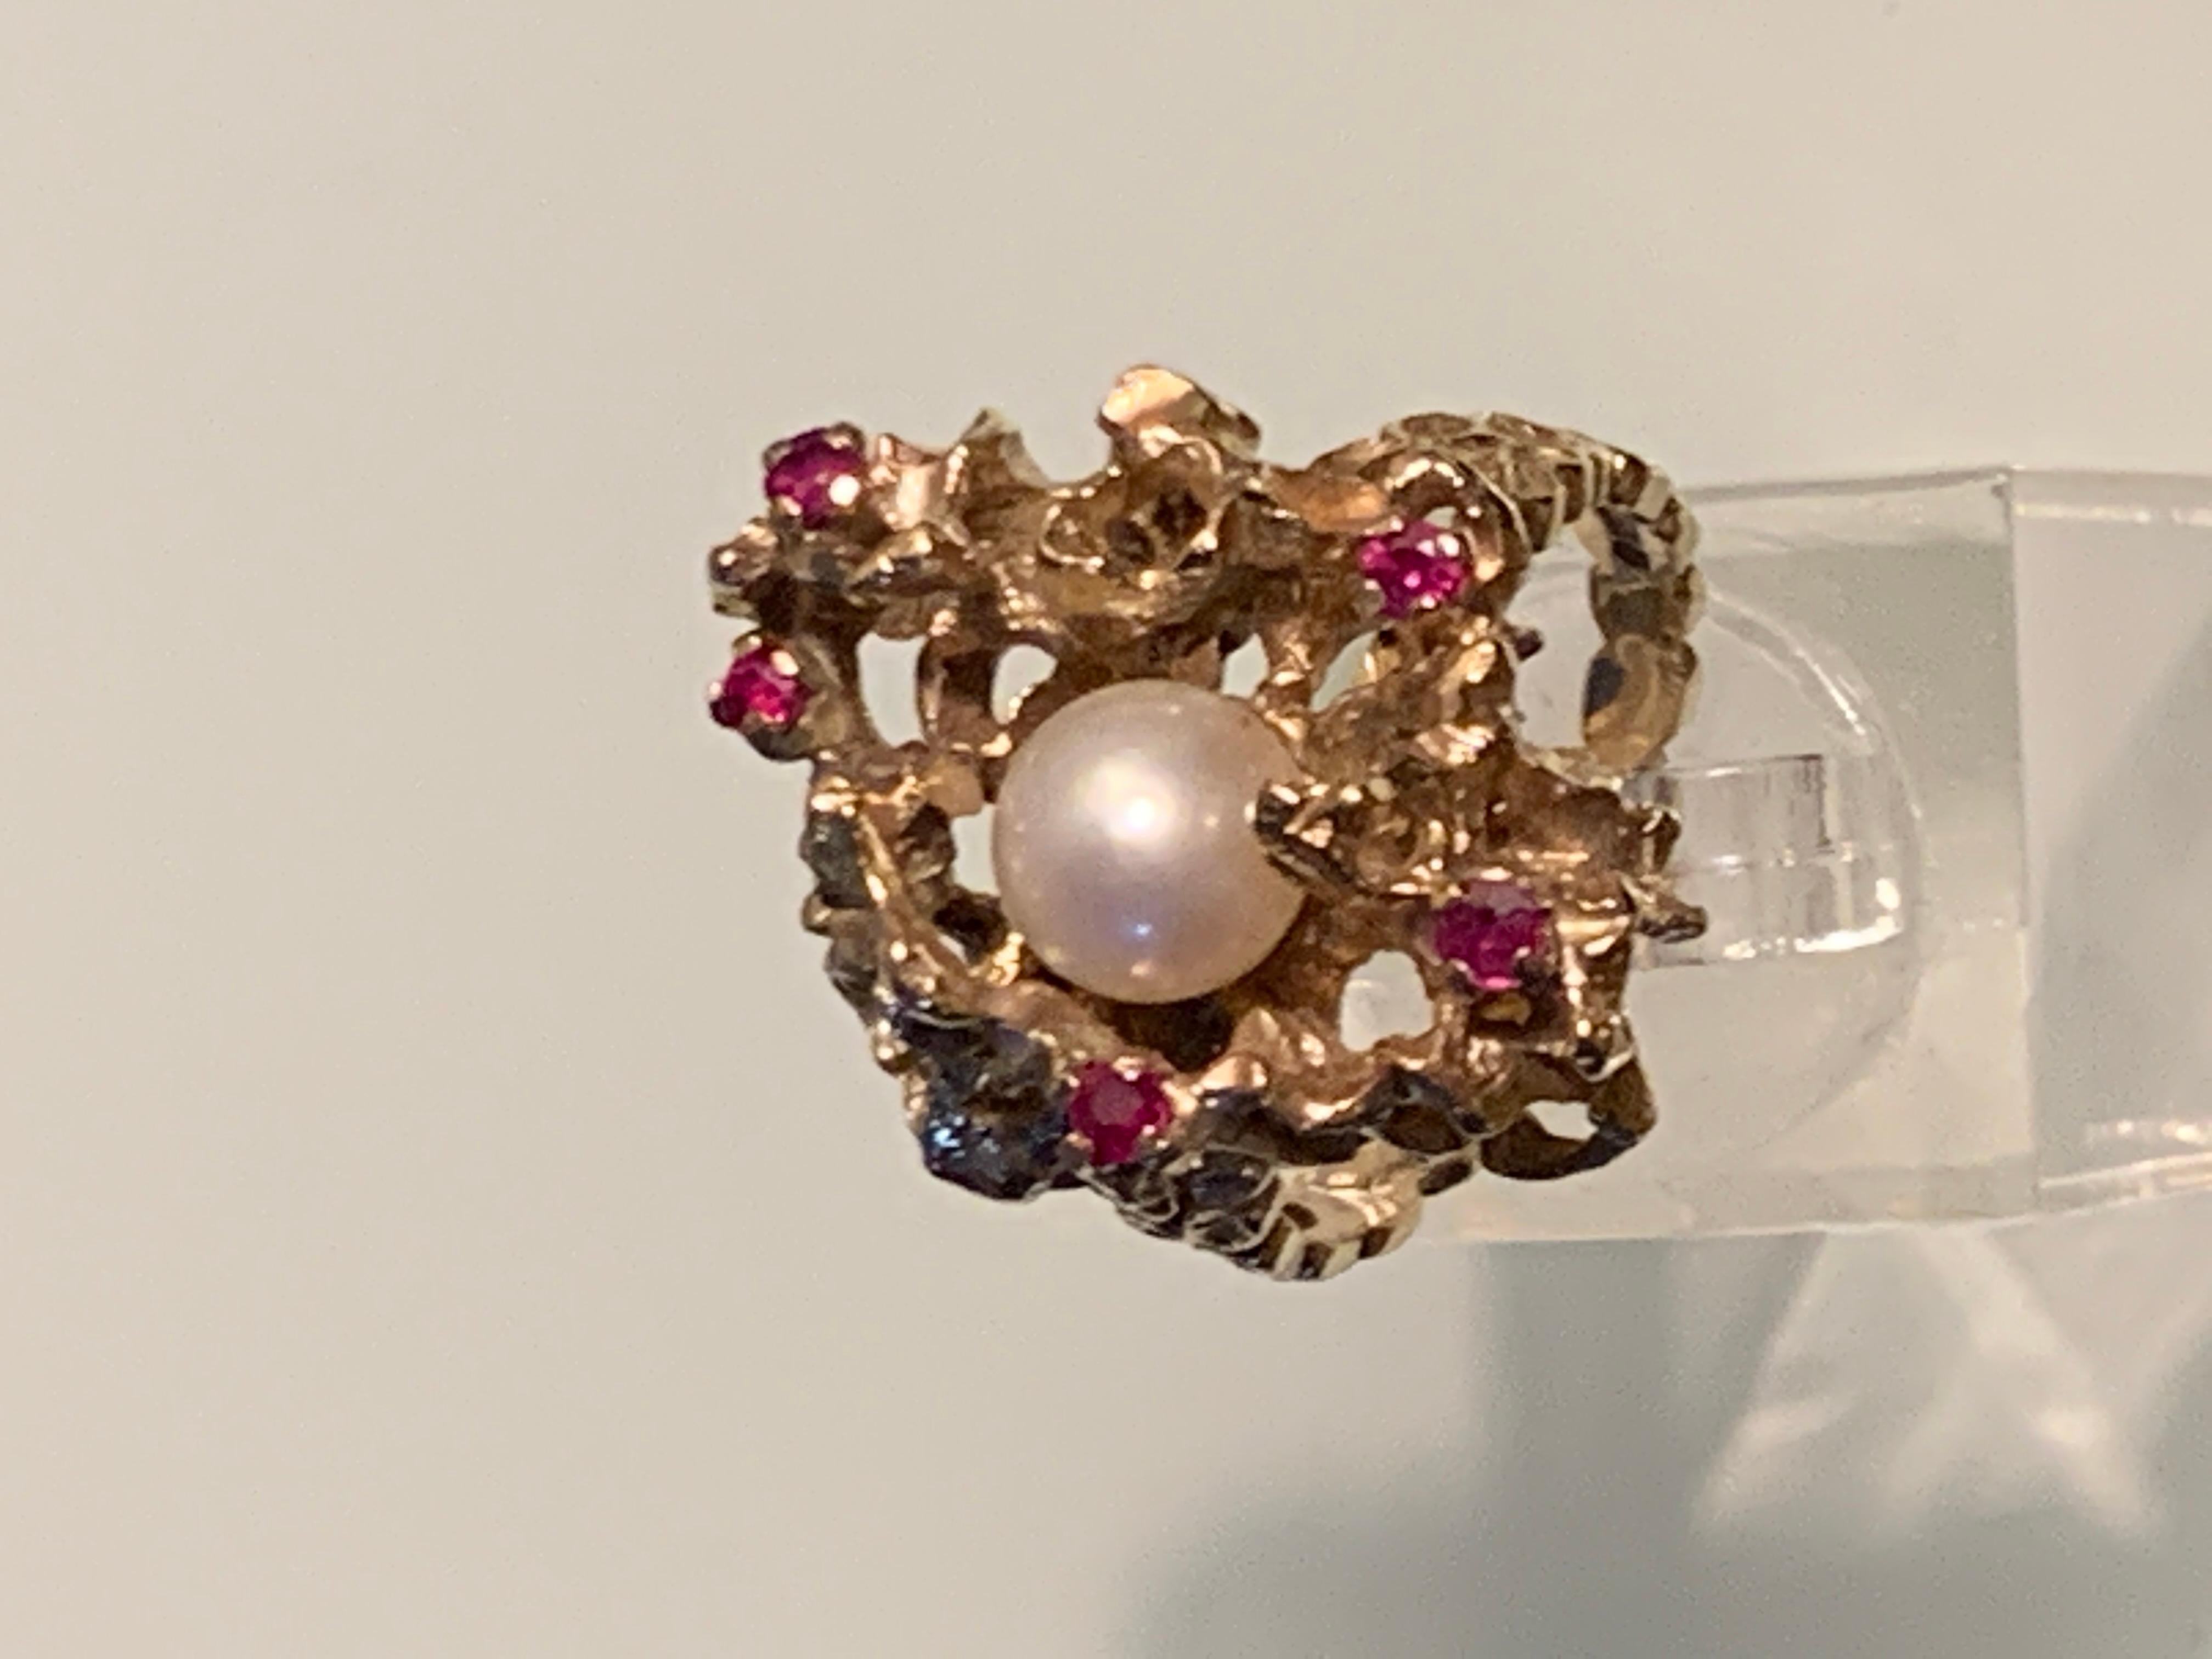 Mid Century Design
9ct Gold Coral design Central Pearl and Rubies.

Central Cultured pearl size - 7.5mm ( milimeters)

Rubies x 5  size - 2.5mm (millimeters)

Size - 18mm ( inner diameter )
U.K - P 1/2
U.S - 7 3/4

Fully Hallmarked (British)
Dated